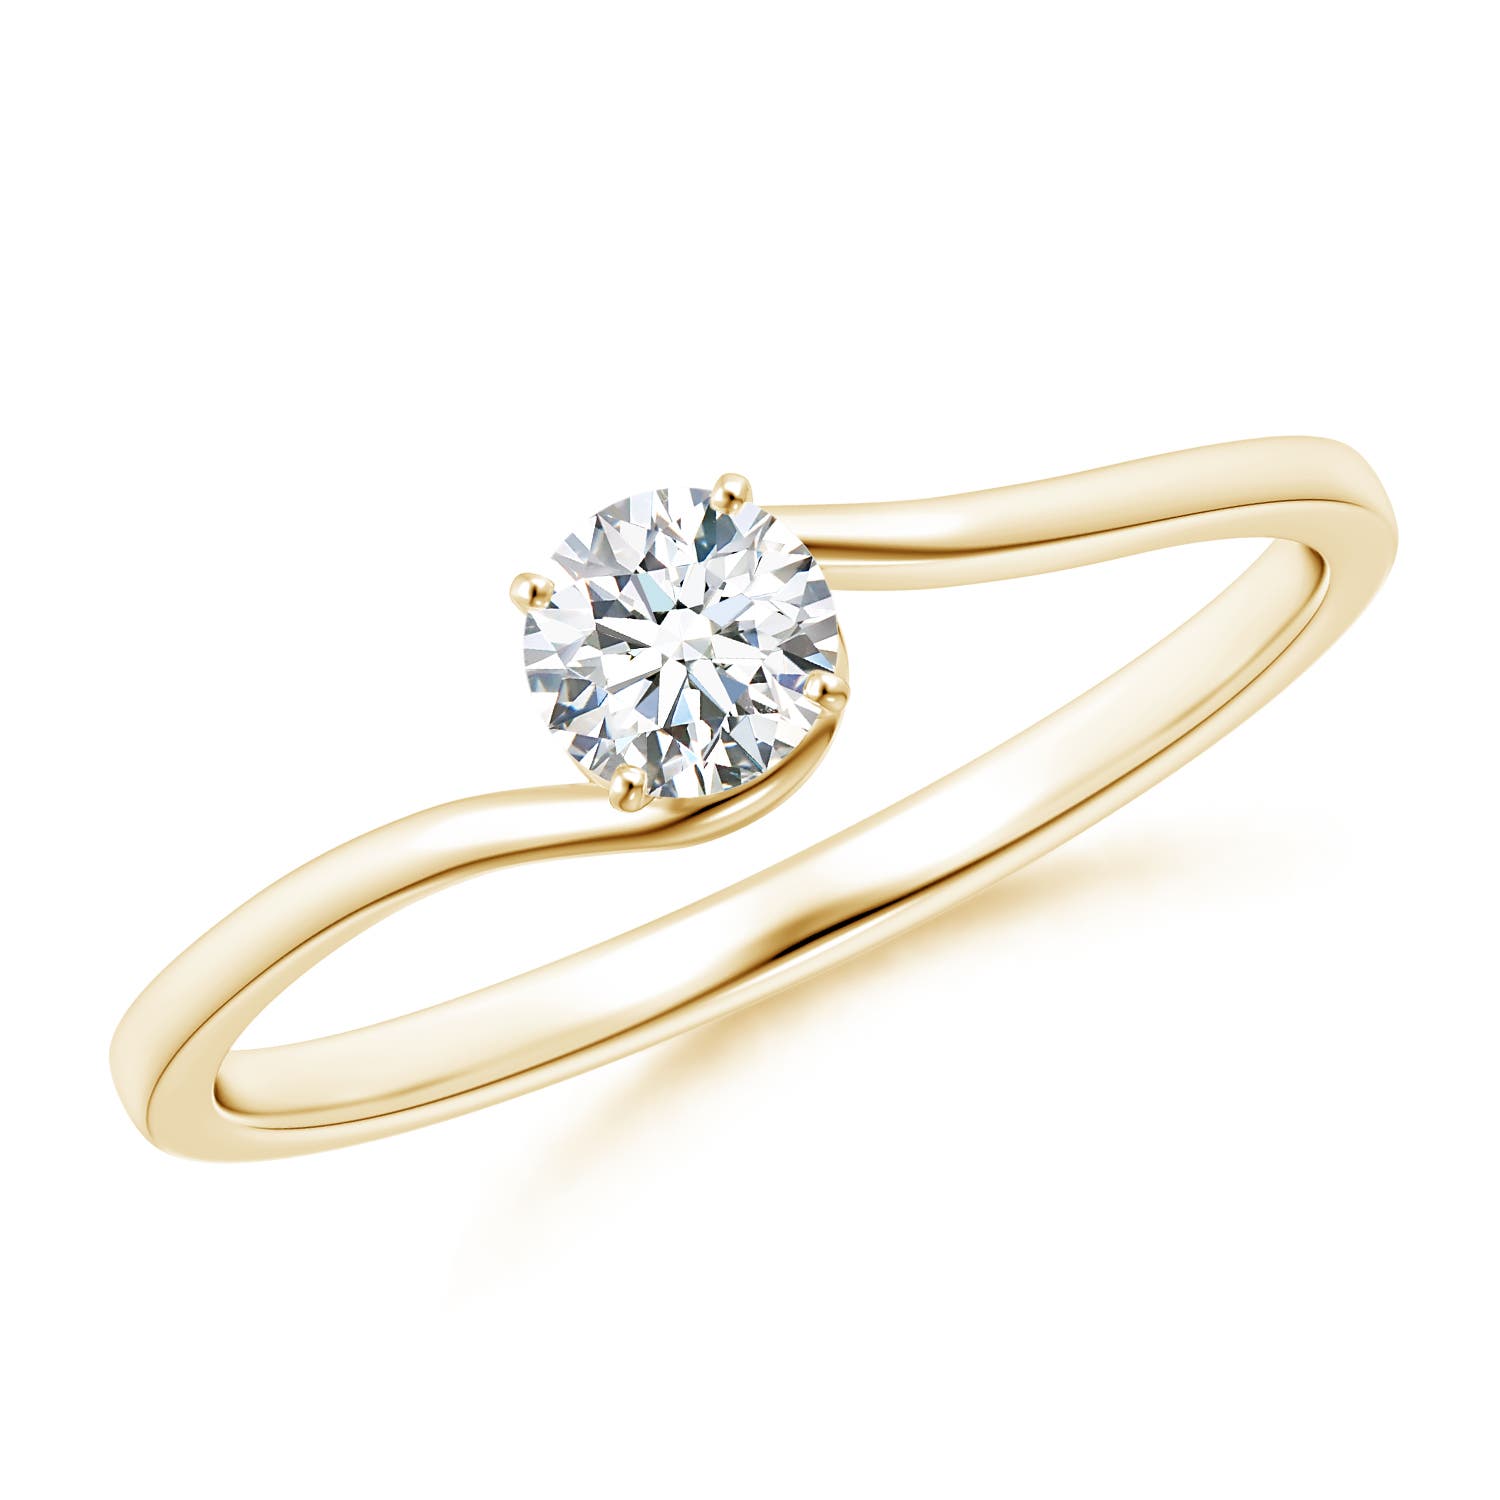 The Best Engagement Rings for Active Women